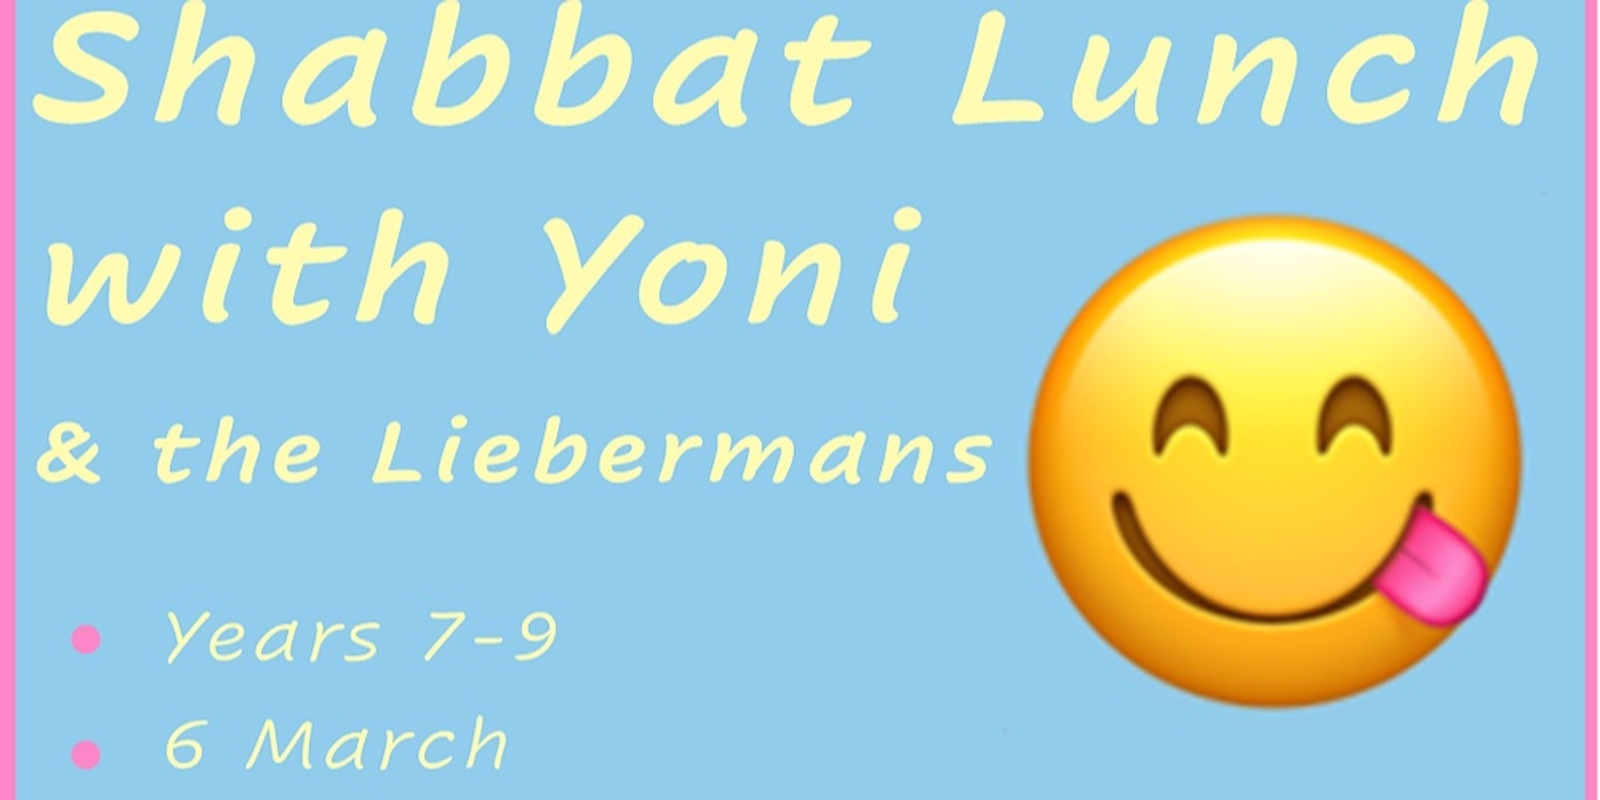 Banner image for Shabbat Lunch with Yoni